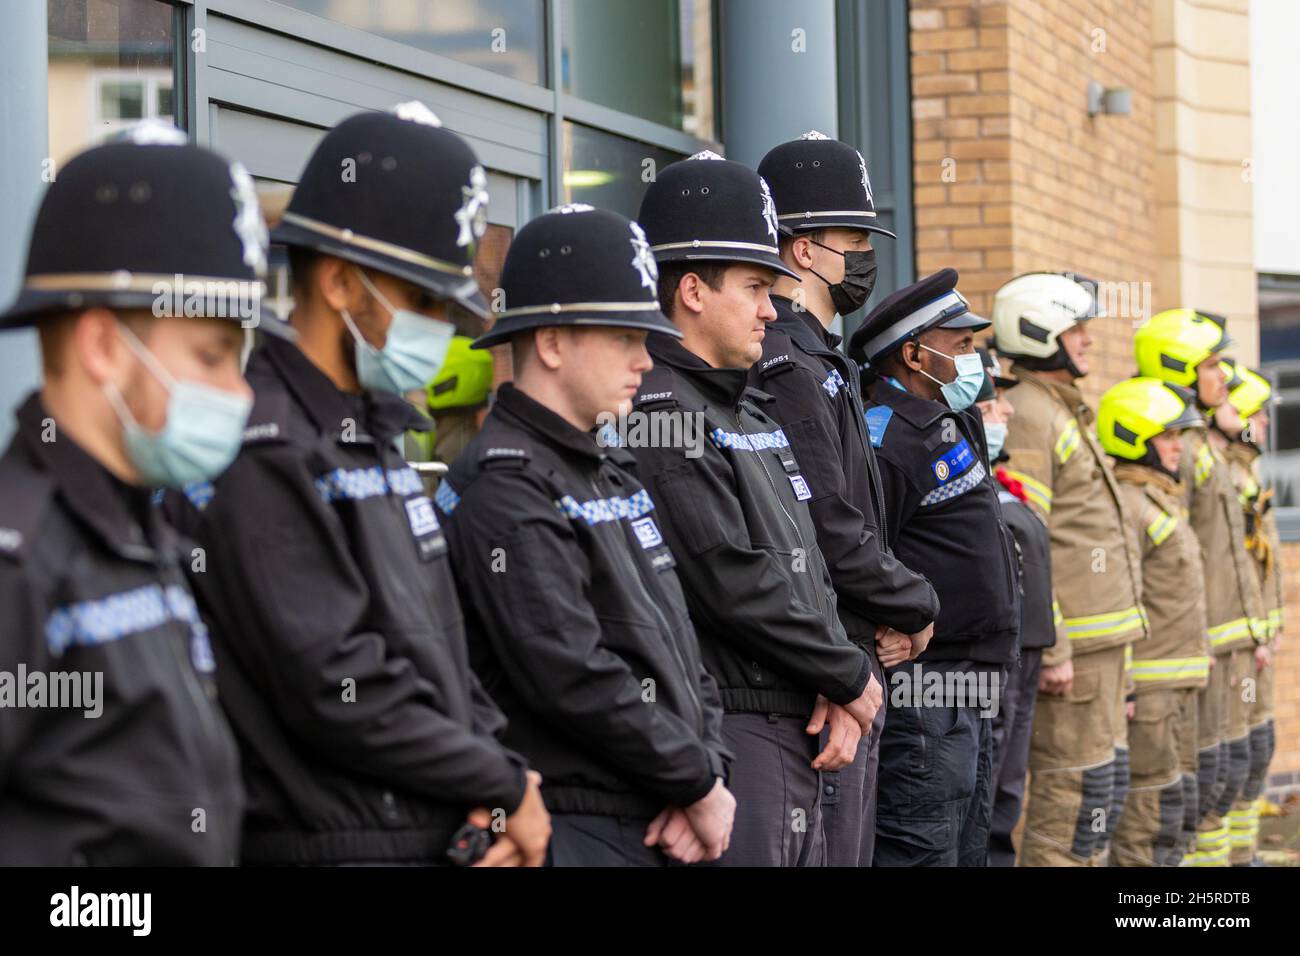 Cradley Heath, West Midlands, UK. 11th Nov, 2021. Fire and rescue service Blue Watch of Haden Cross fire station, West Midlands Fire Service in Cradley Heath, West Midlands, stand to attention with police colleagues on Remembrance Day at 11am for a two minute silence. Credit: Peter Lopeman/Alamy Live News Stock Photo